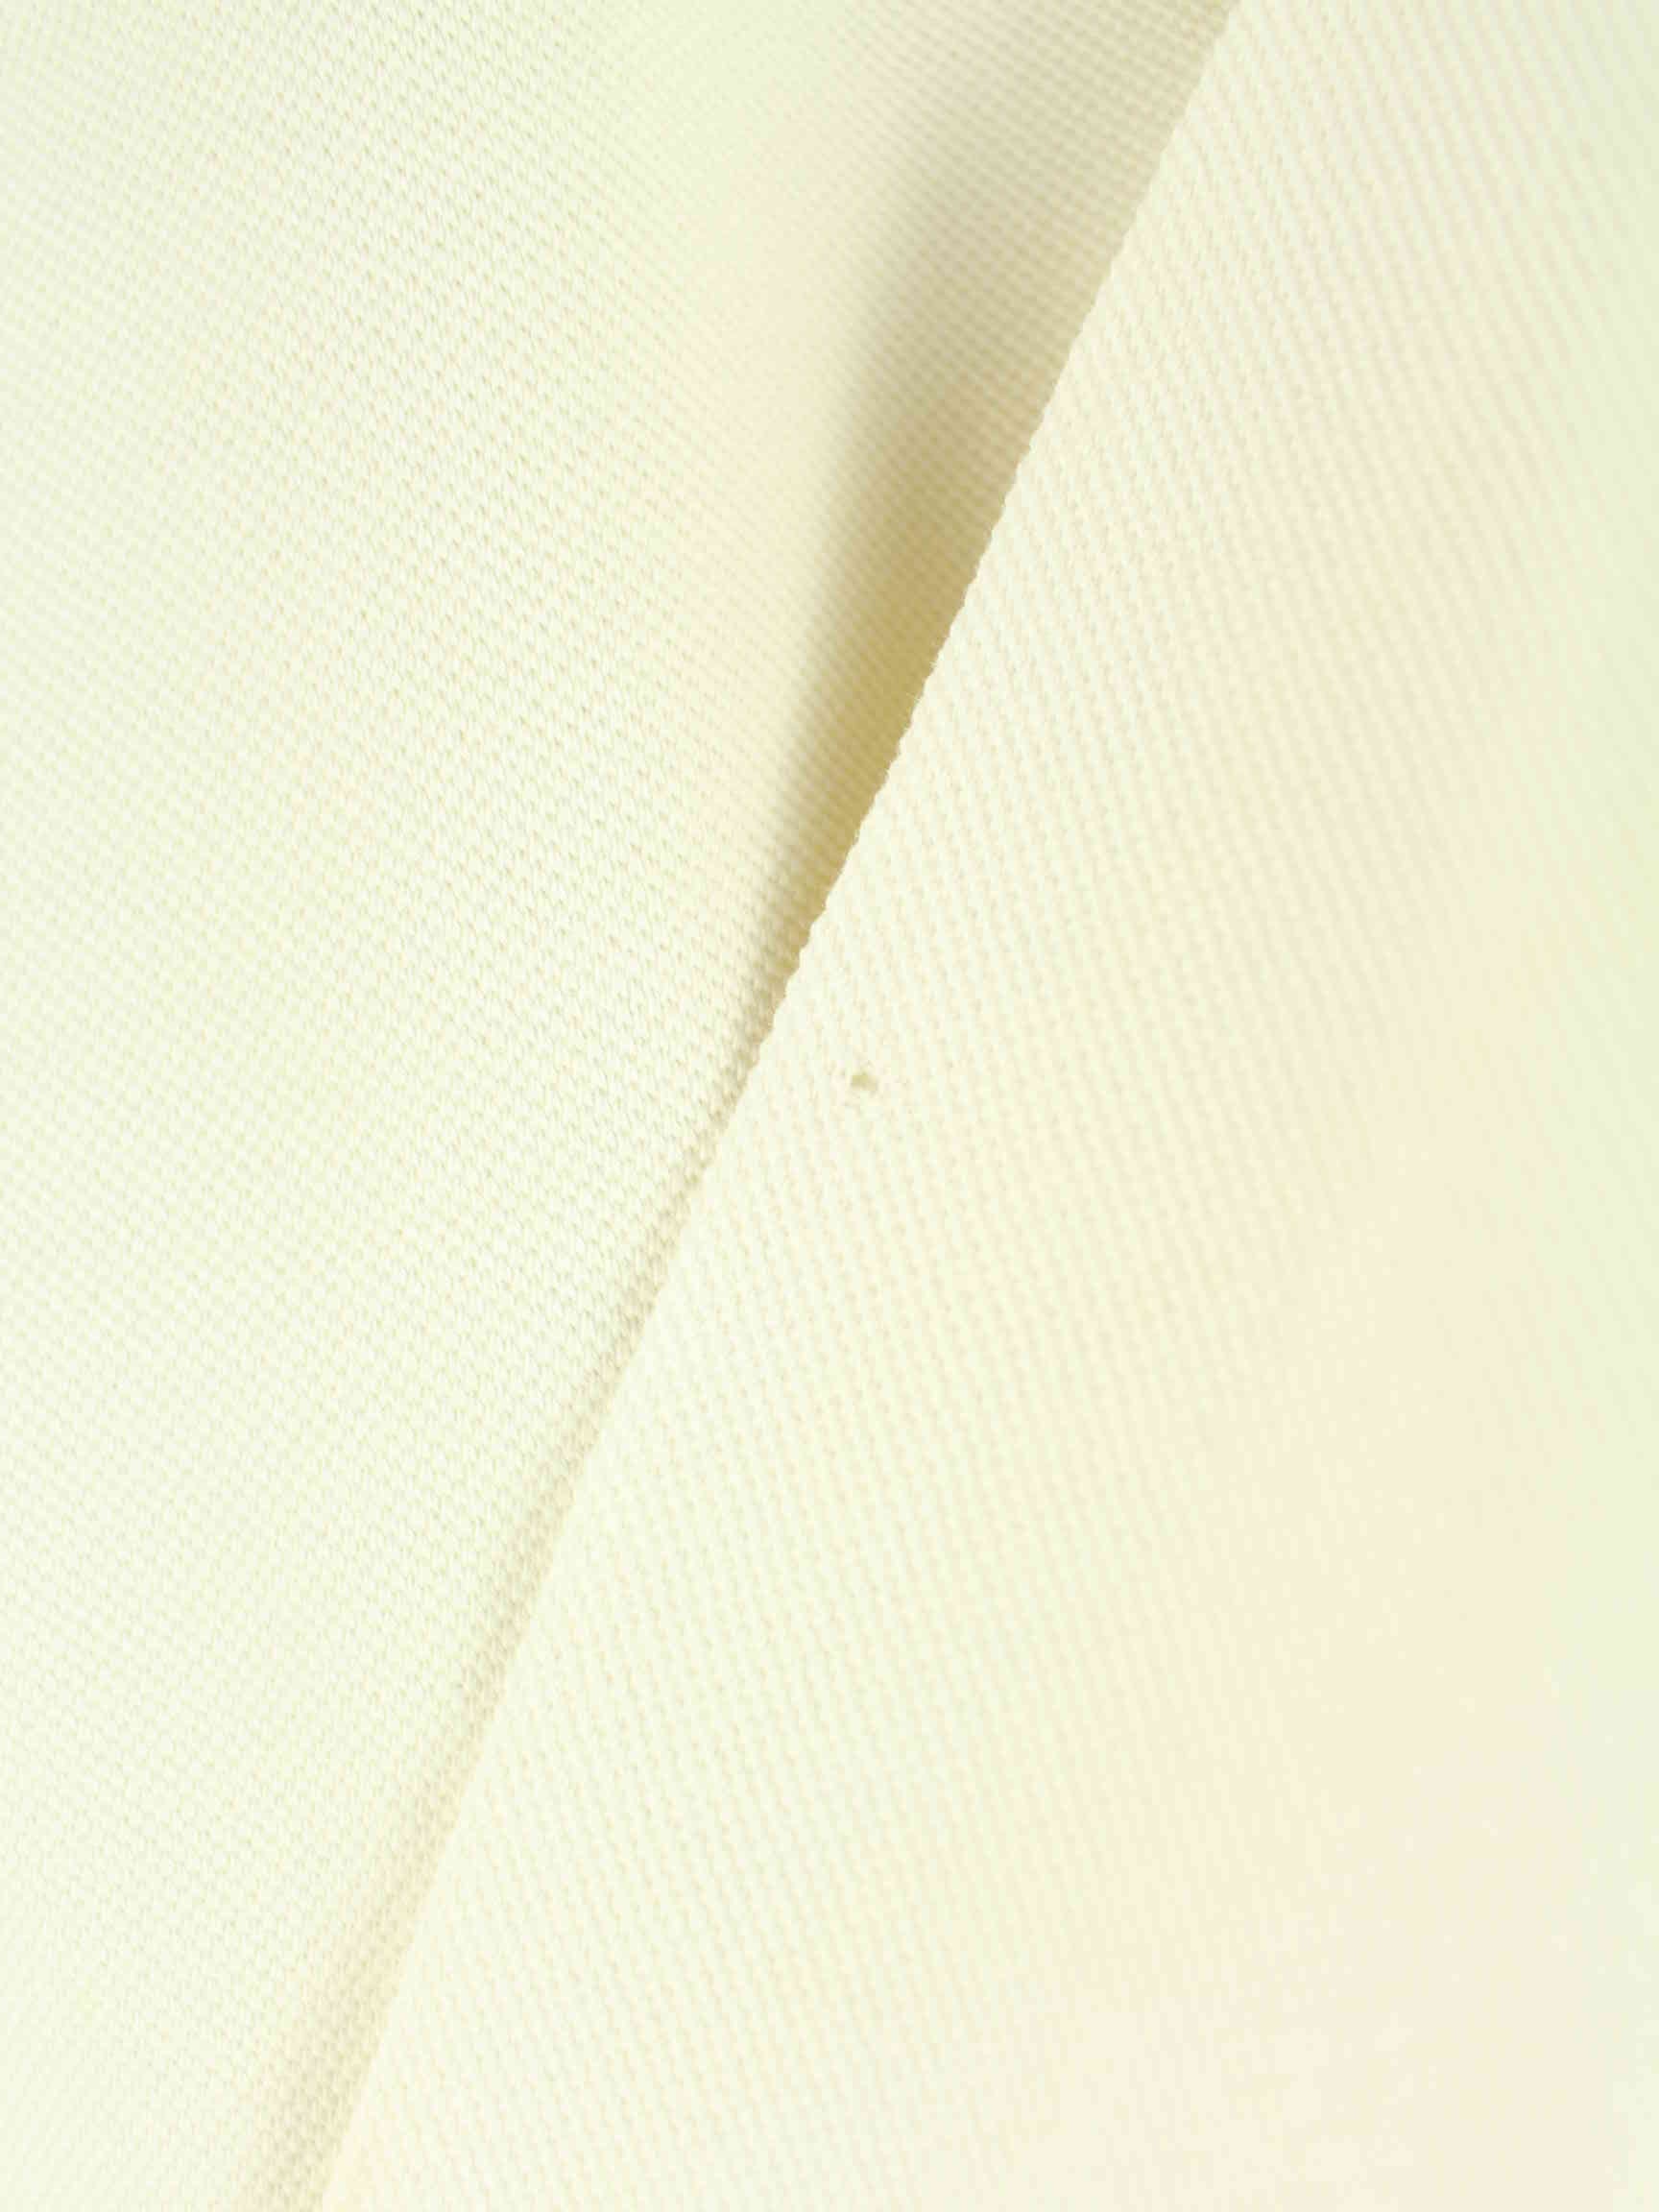 Lacoste 90s Vintage Polo Sweater Beige M (detail image 9)